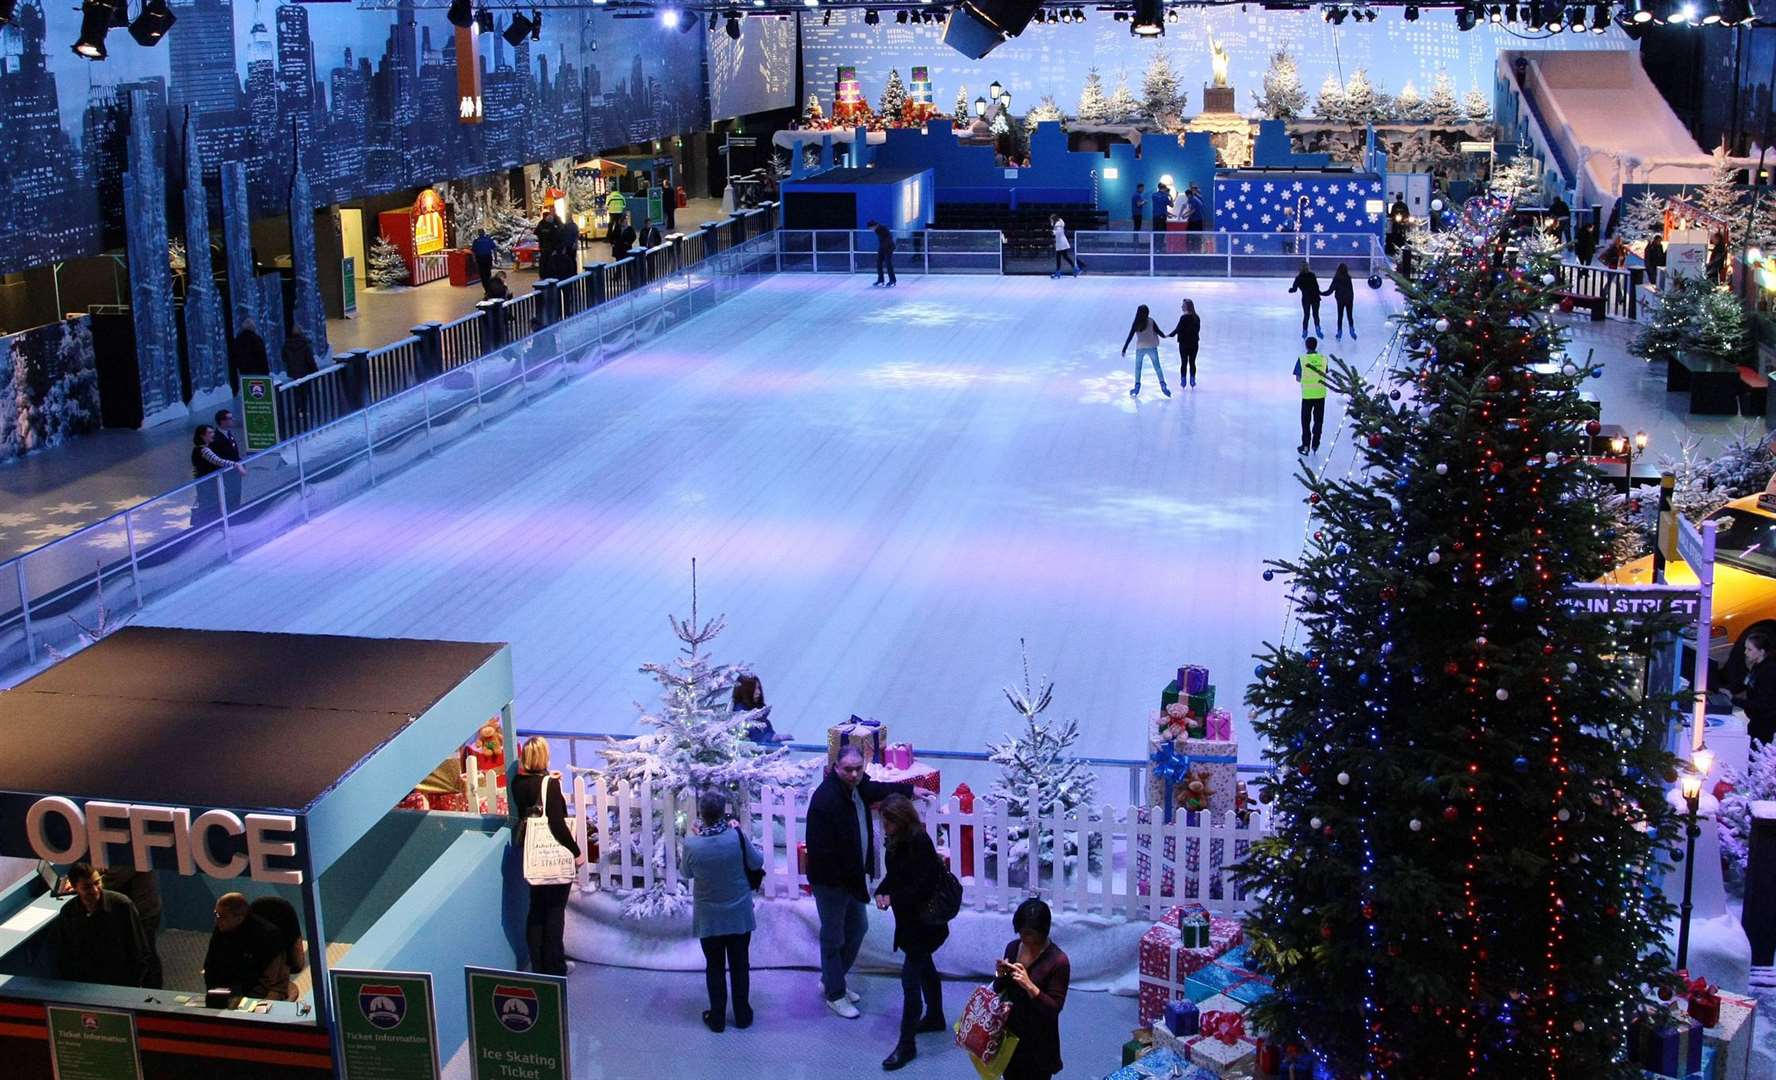 An ice rink similar to that at Bluewater will be in the Dane John Gardens later this year. Photo: Hugo Philpott/PA Wire